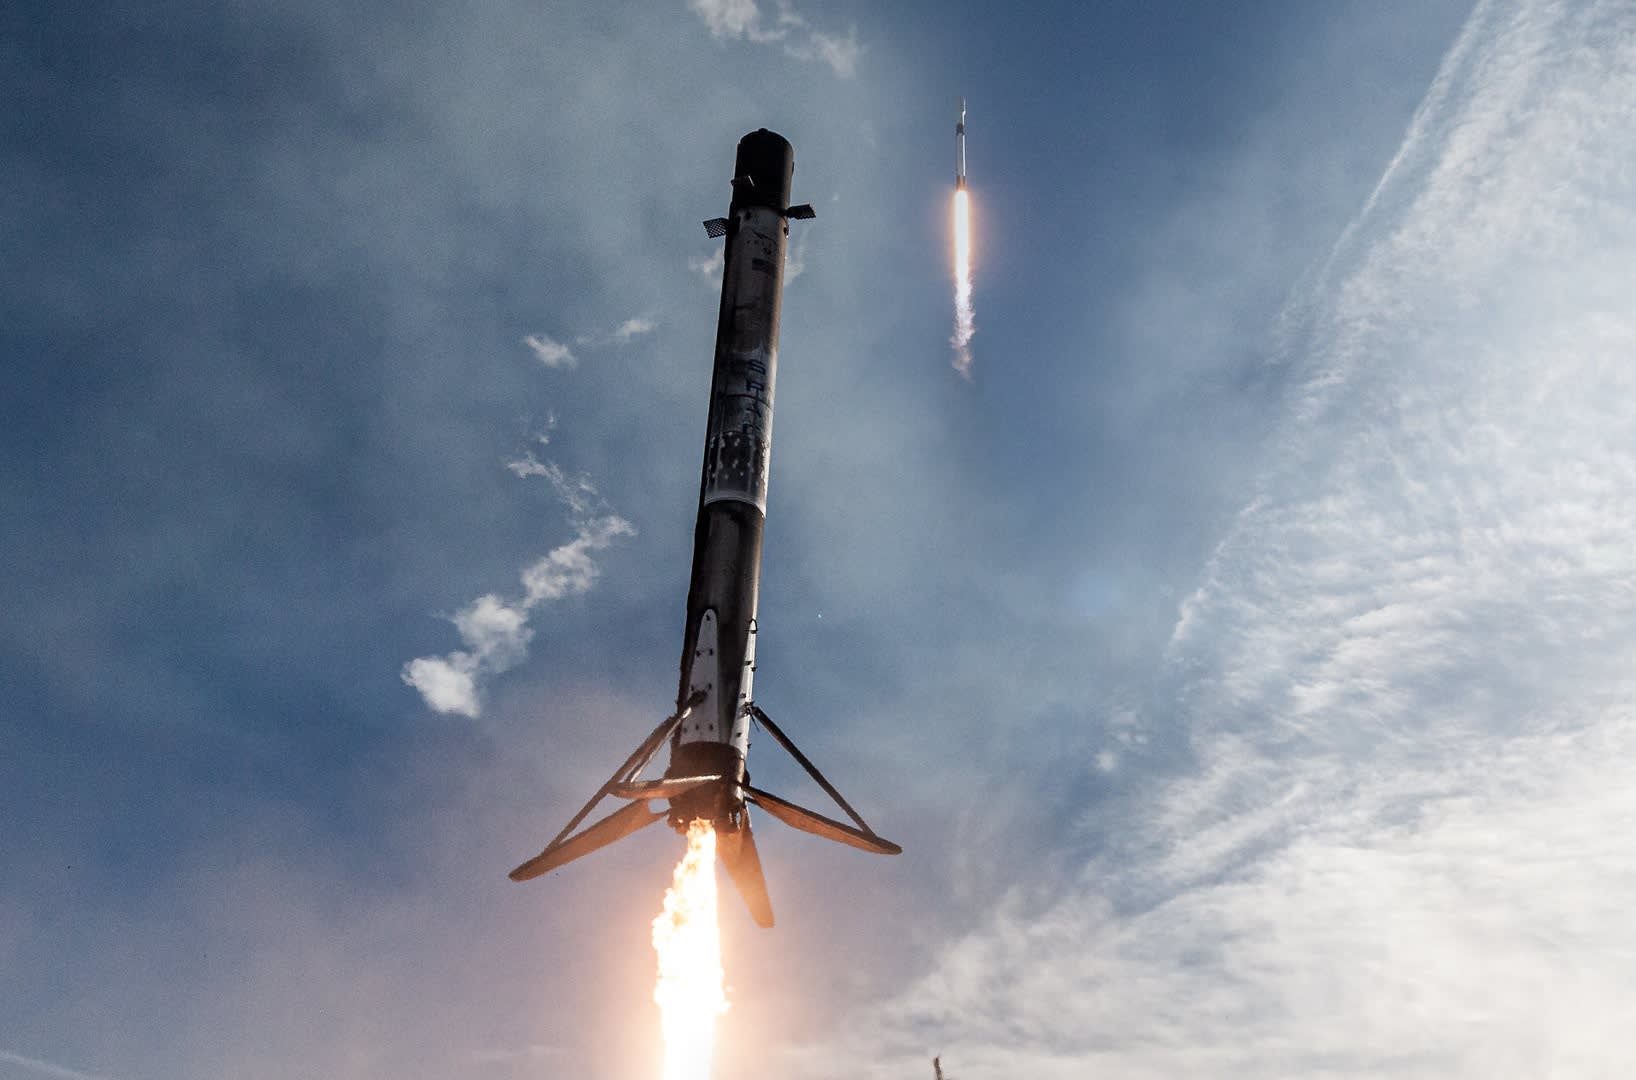 Area Power clears SpaceX to reuse rockets for navy missions